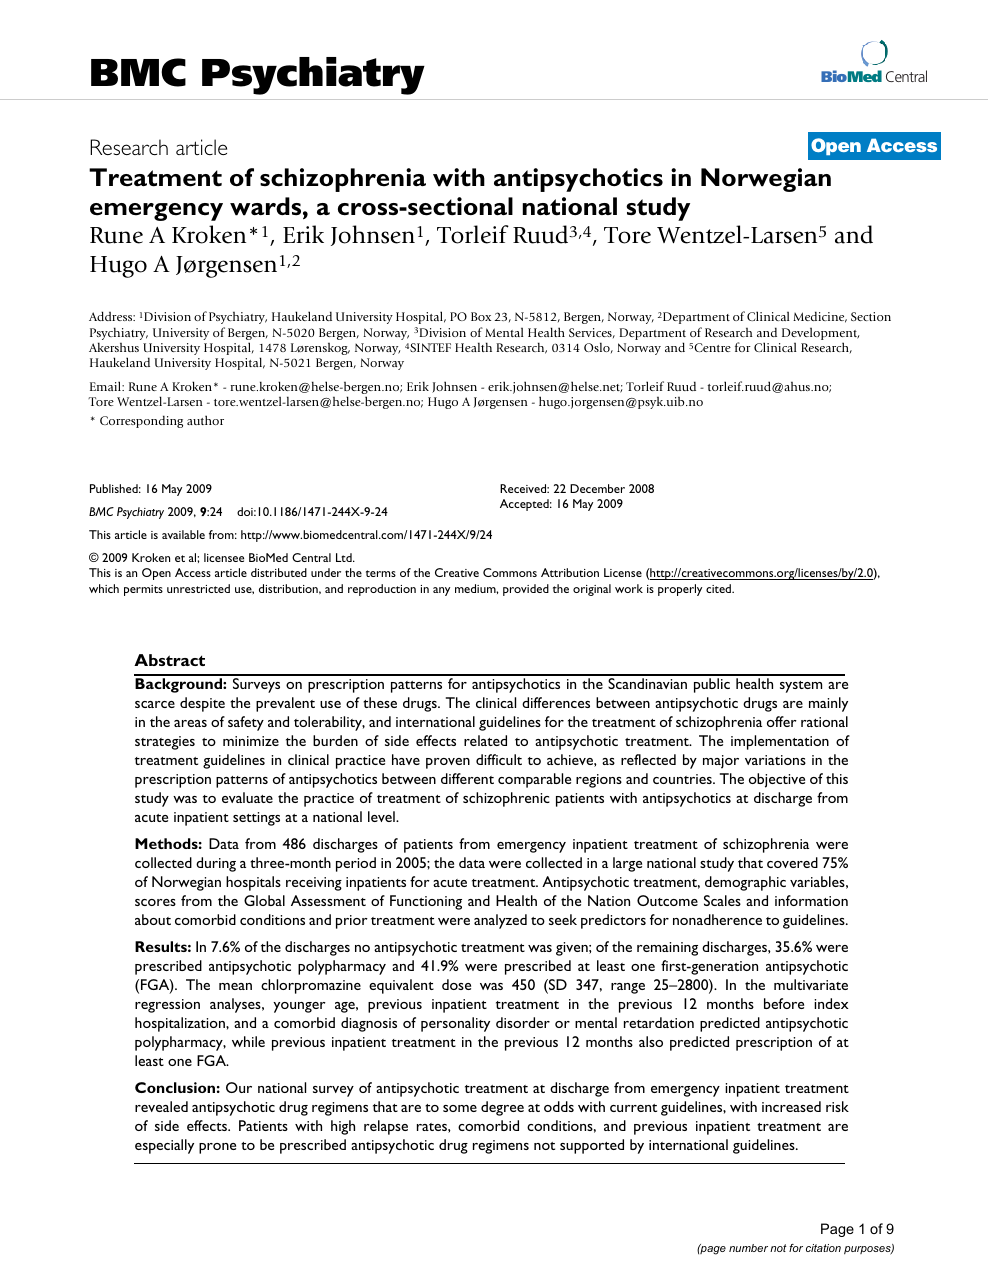 Treatment of schizophrenia with antipsychotics Norwegian wards, a cross-sectional national study – topic of research paper in Clinical medicine. Download scholarly article PDF and read free on CyberLeninka open